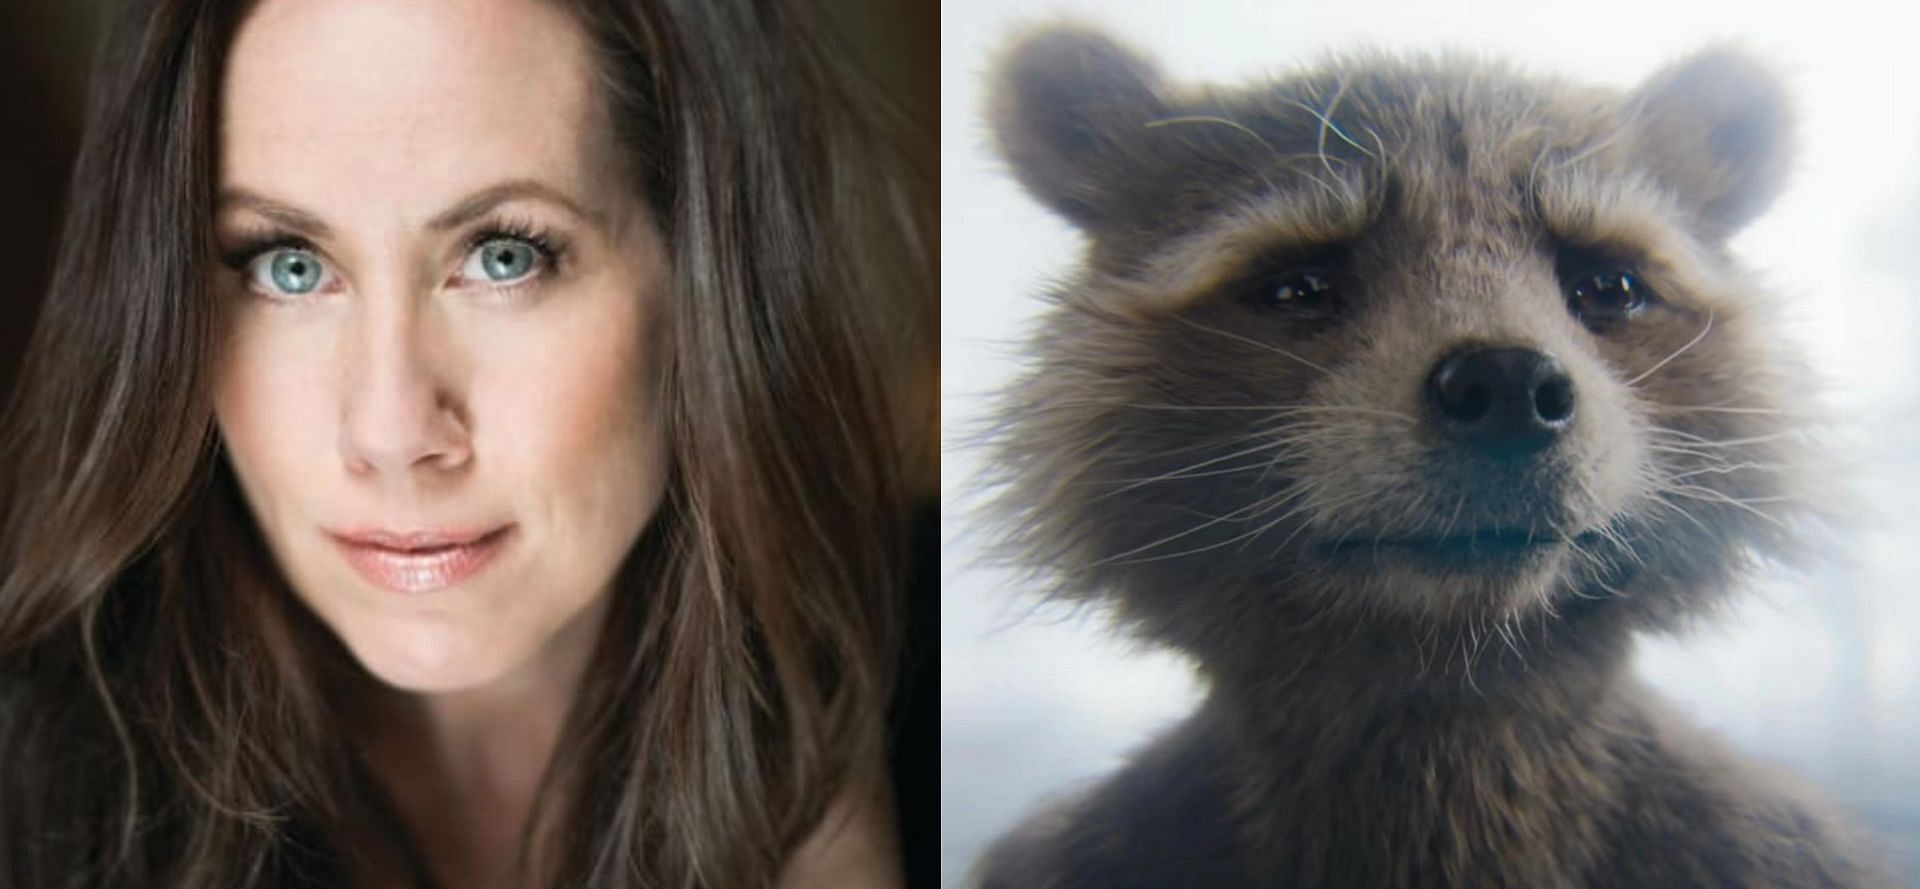 Guardians of the Galaxy 3 actress reveals why the animal scenes in the film had to be terrible (Image via Movie Database/Marvel)